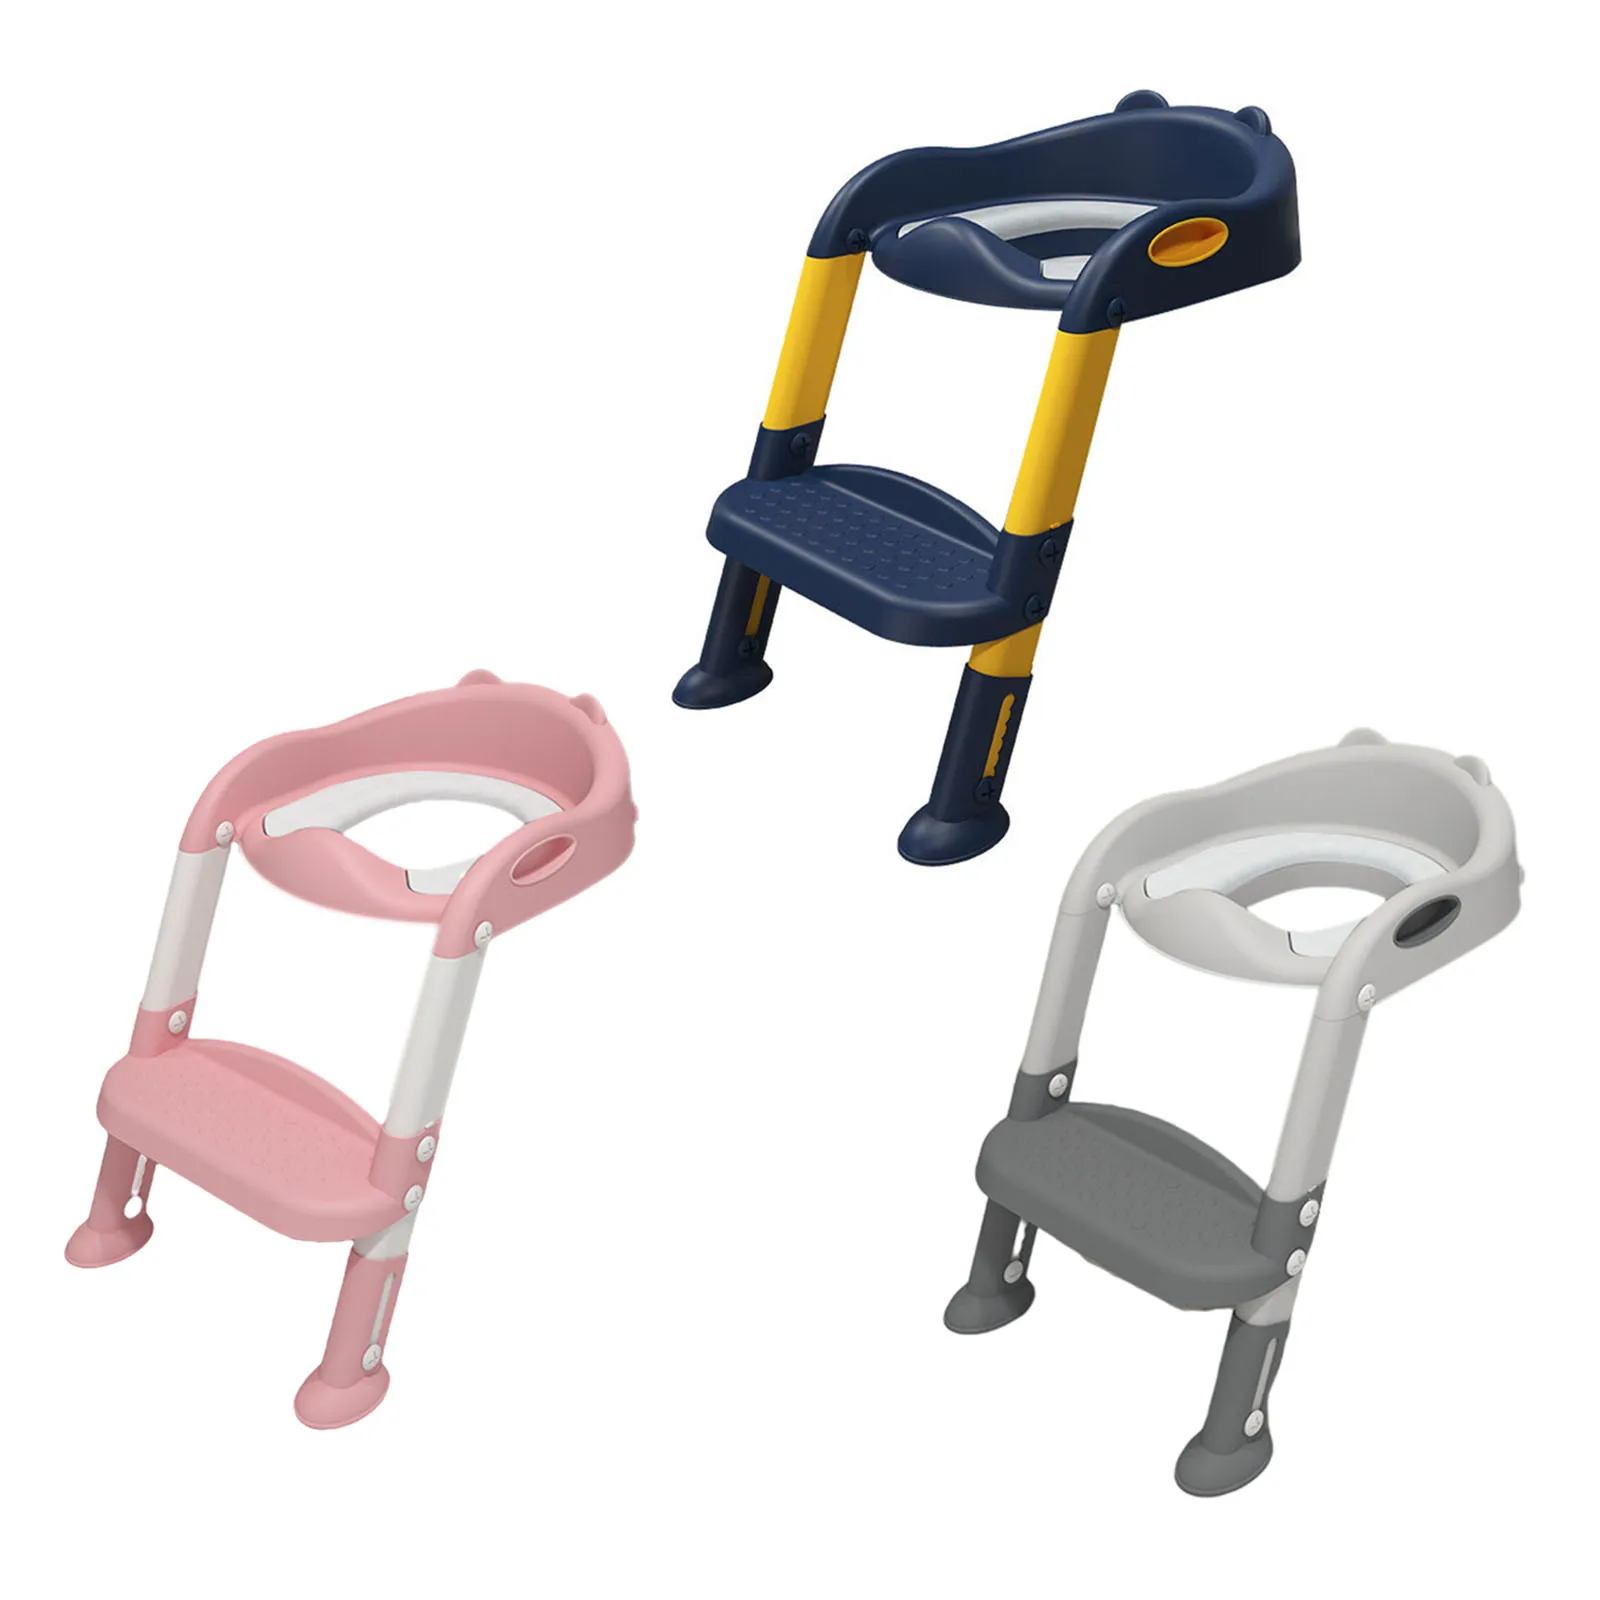 Children Toilet Seat Soft Pad Anti-Slip with Handle Potty Chair for Toilet